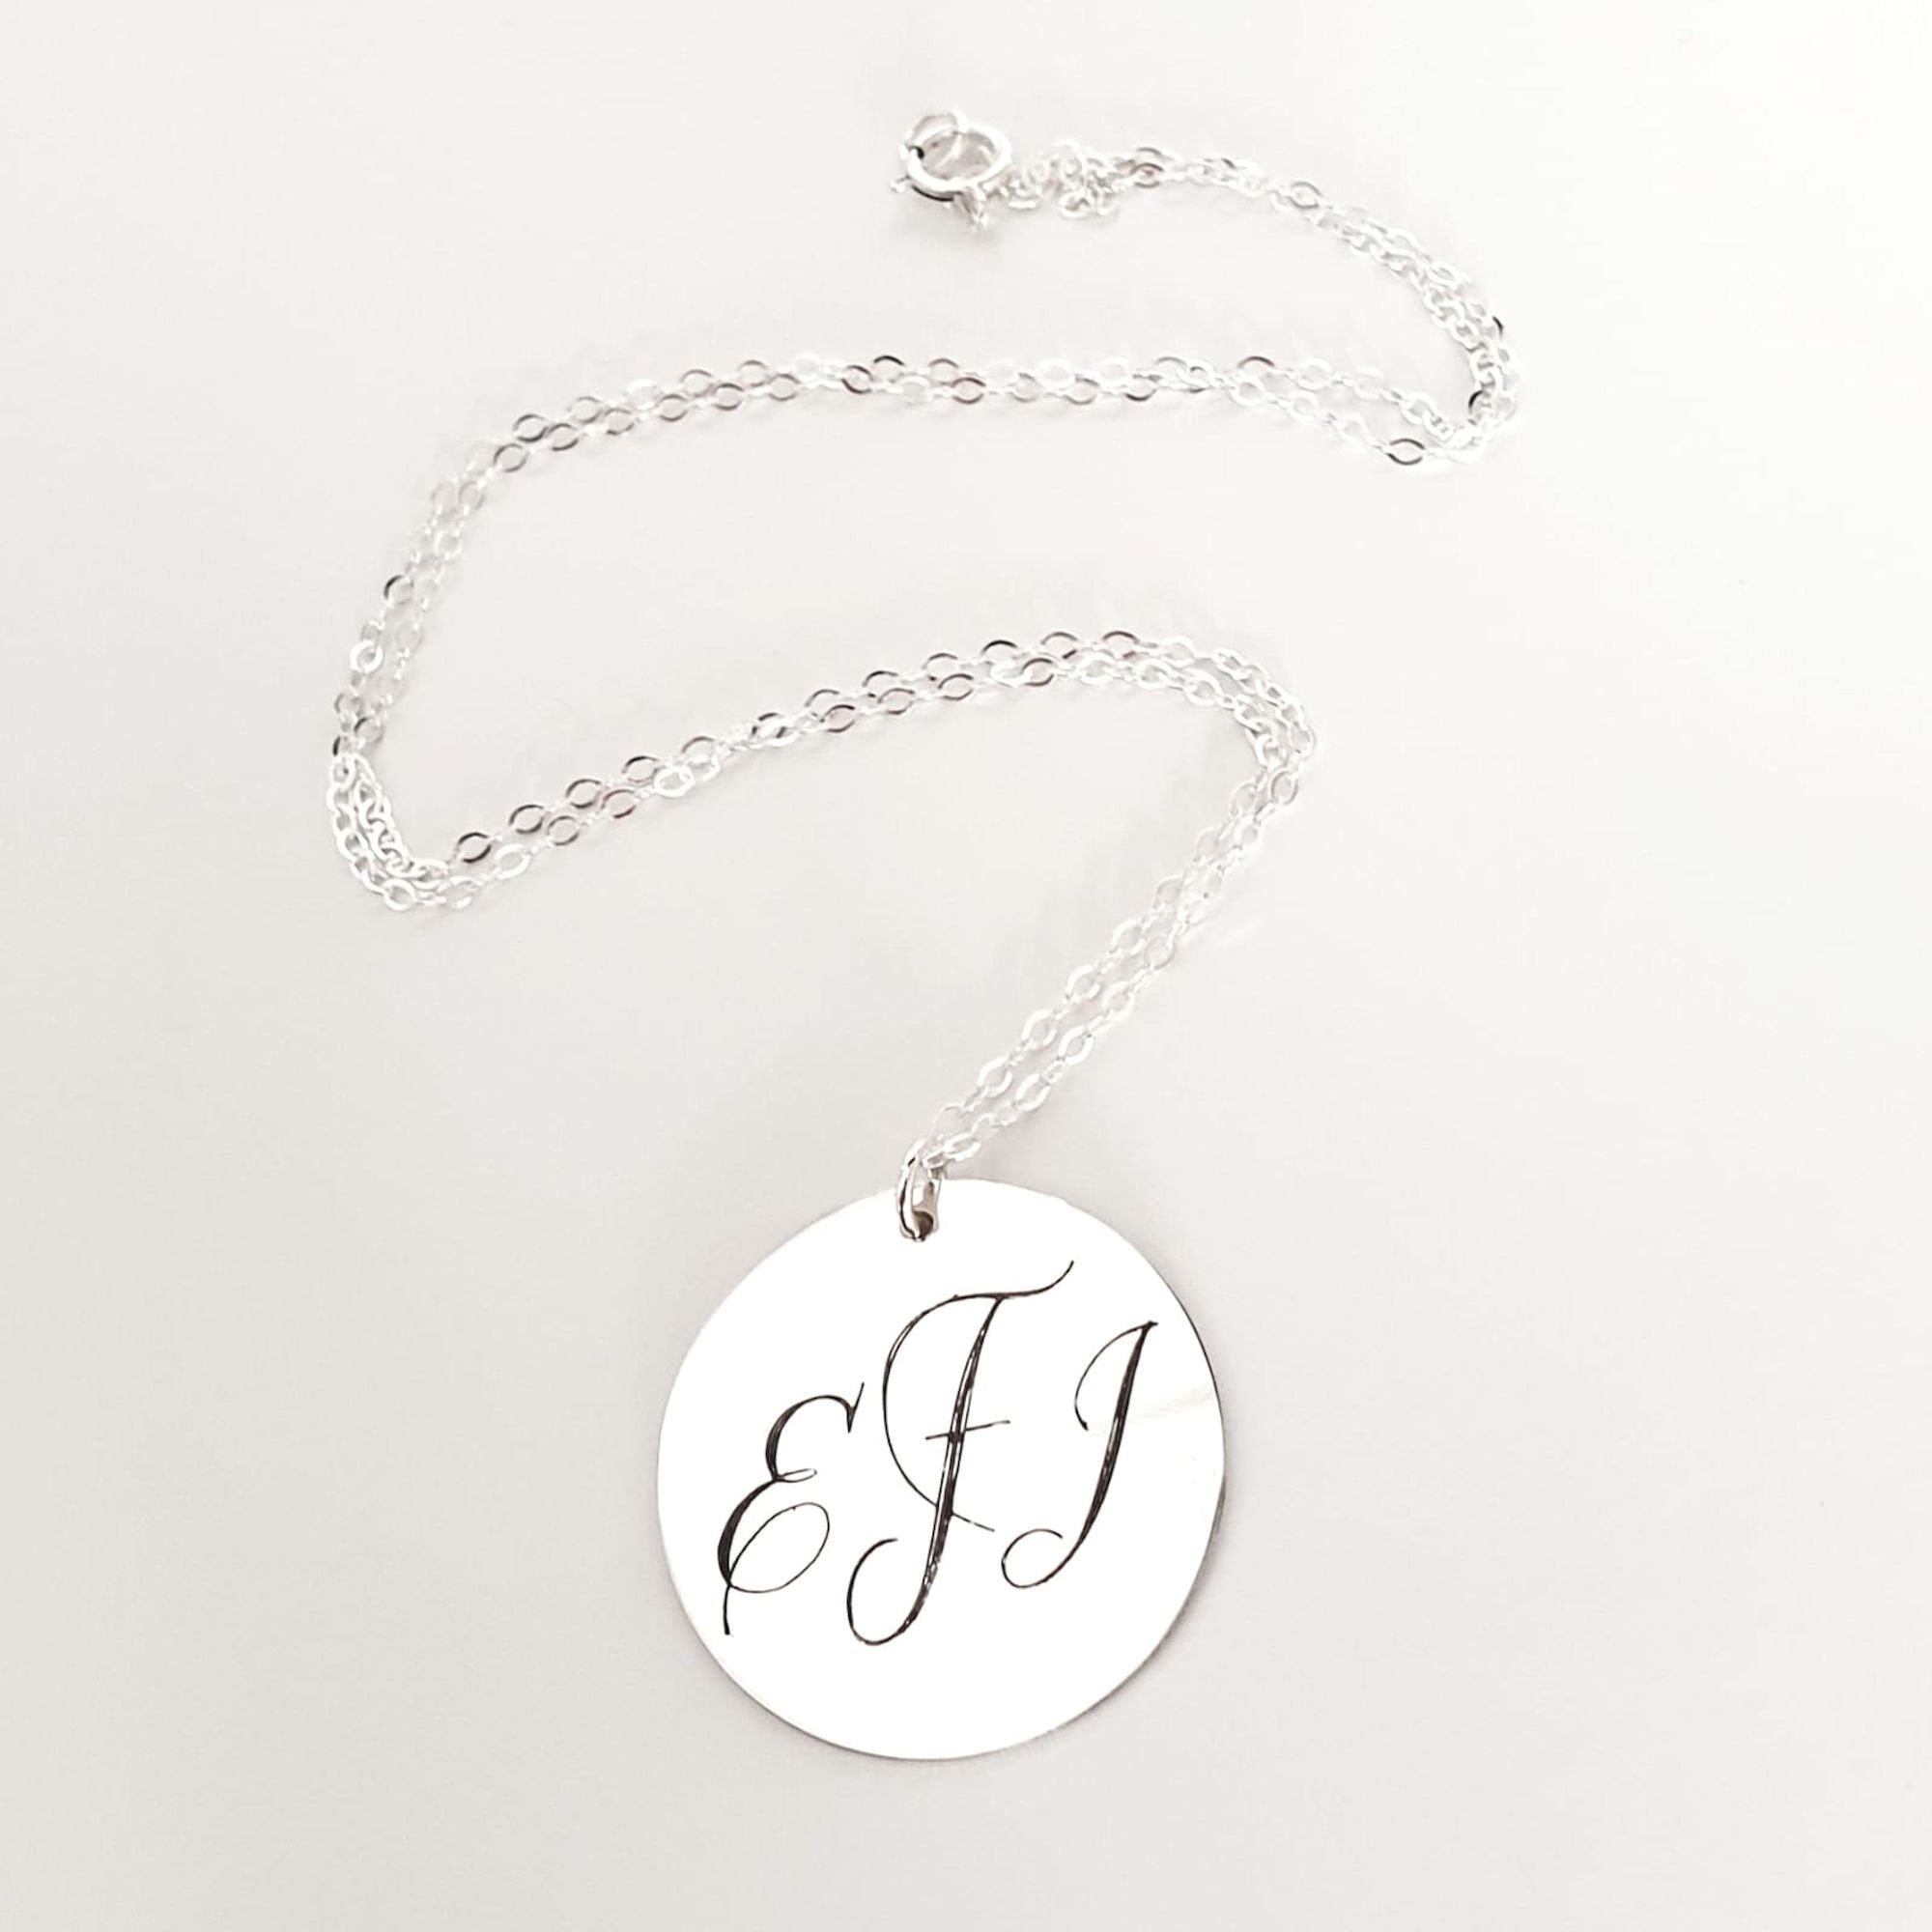 1 inch Sterling Silver Monogram Engraved Disc Charm Necklace